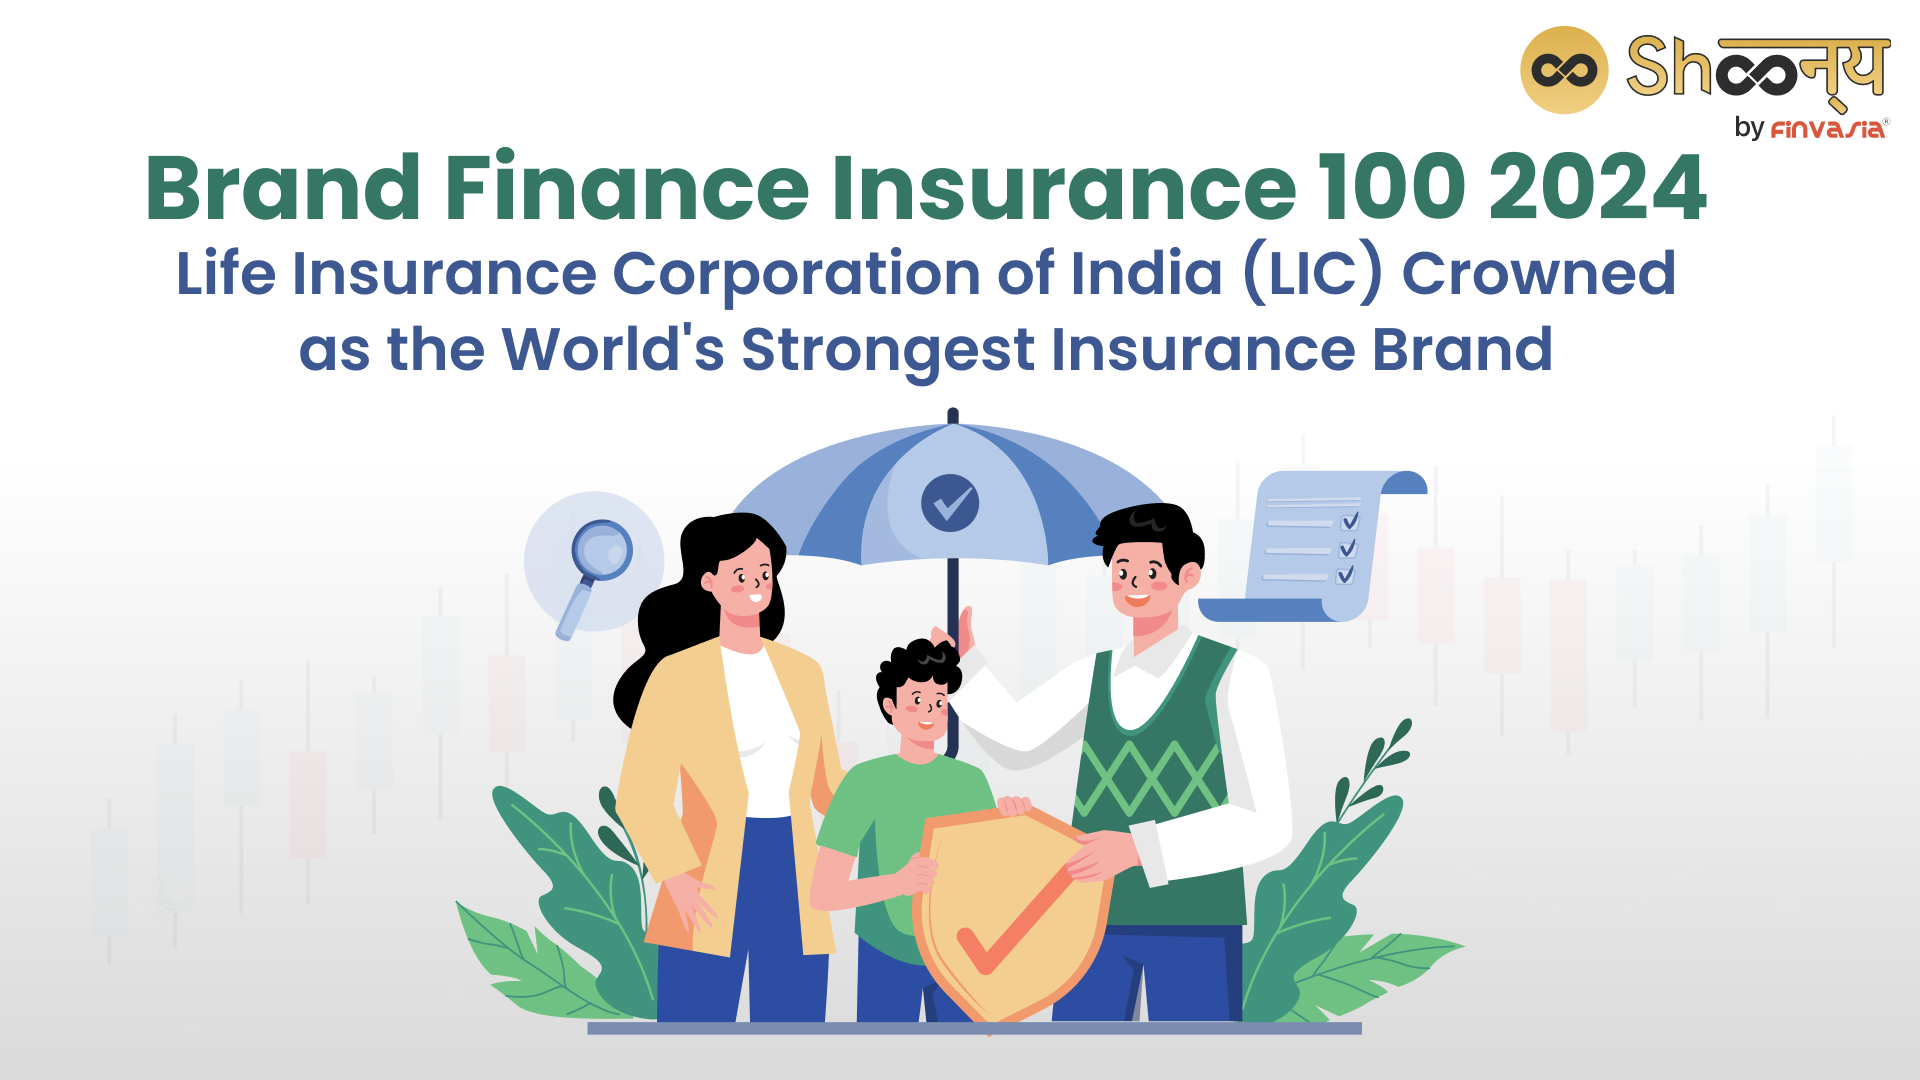 LIC Becomes the World's Strongest Insurance Brand